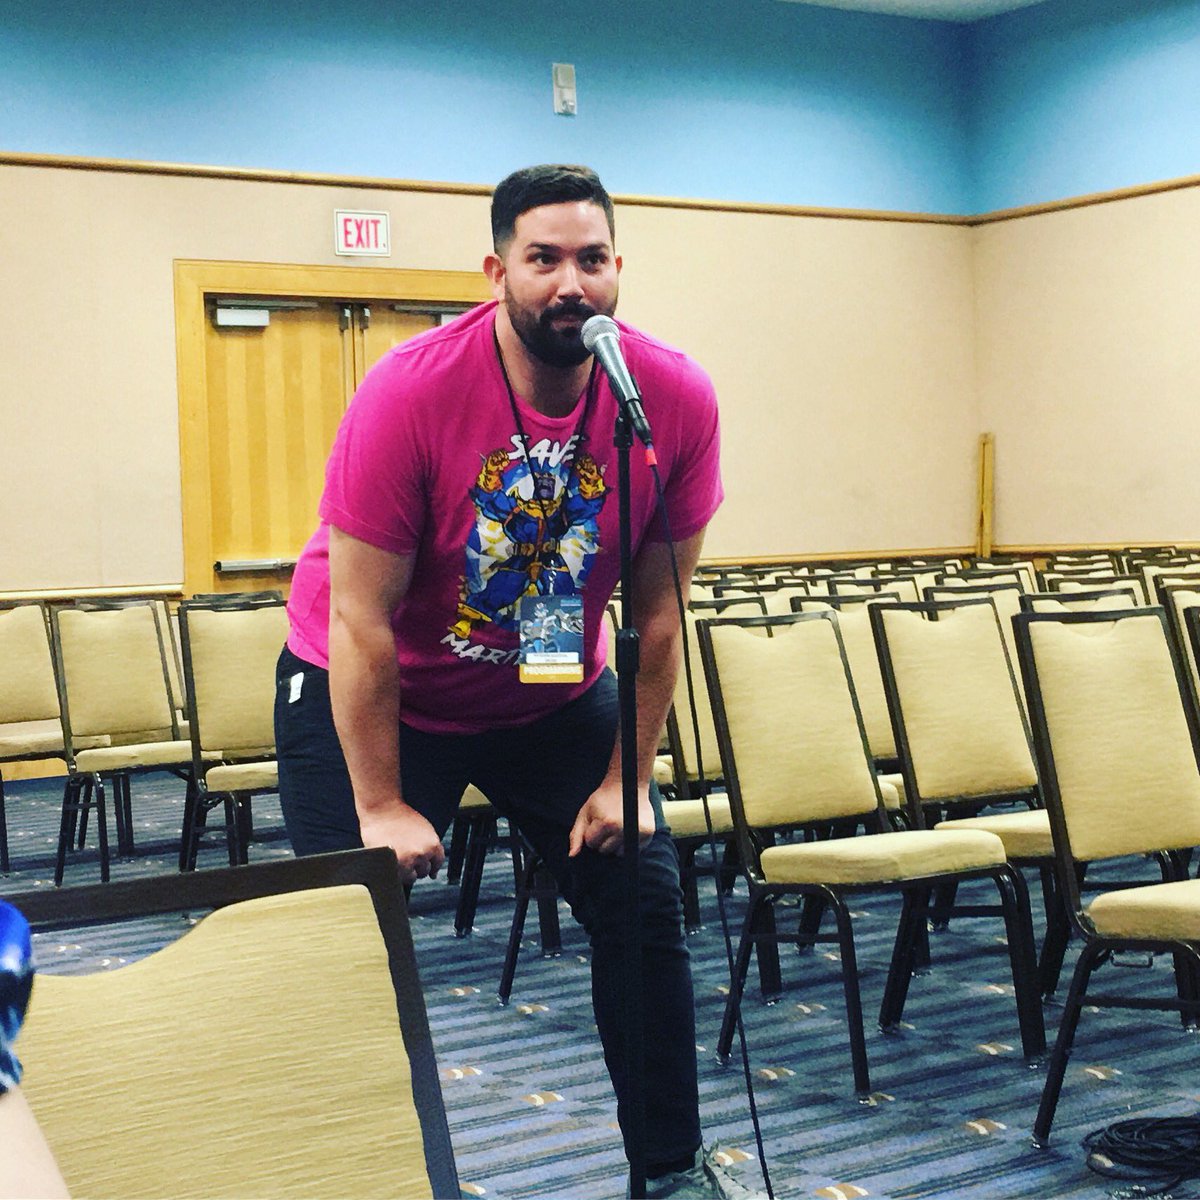 When you ask a panelist a question but look like a linebacker

#bigguyproblems #twitchstreamer #podernfamily #twitchaffiliate #megacontampa #megacontampabay #cosplayfame #tampabaycomiccon2018 #megacontampa2018 #howtostartapodcast #supportsmallstreamers #bigpeopleproblems